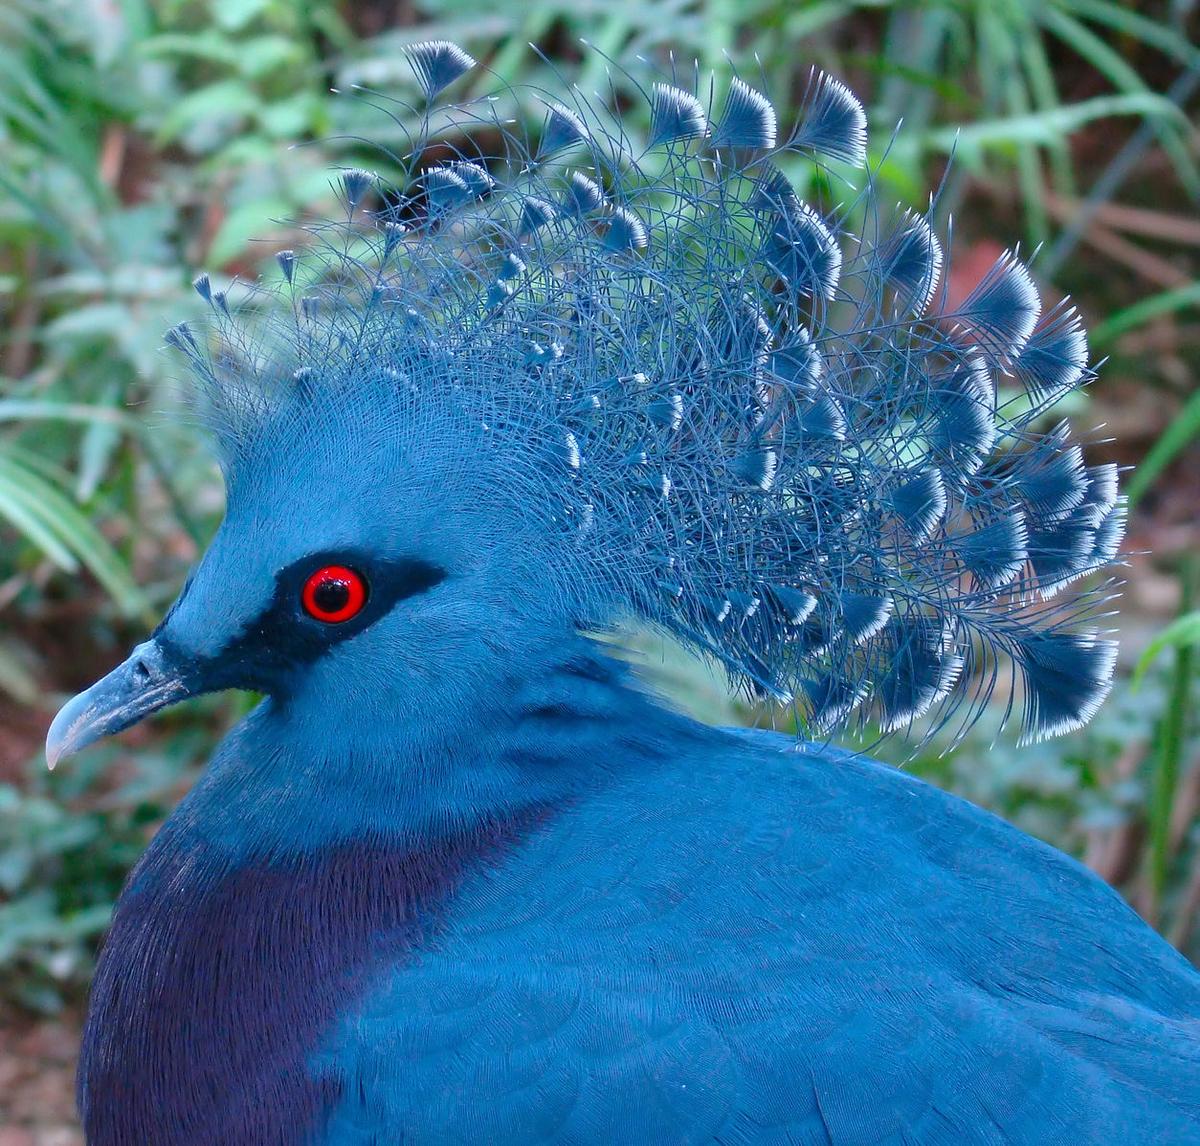 (<a href="https://commons.wikimedia.org/wiki/File:Victoria_Crowned_Pigeon_Jurong.jpg">Bjørn Christian Tørrissen</a>/CC BY-SA 3.0)